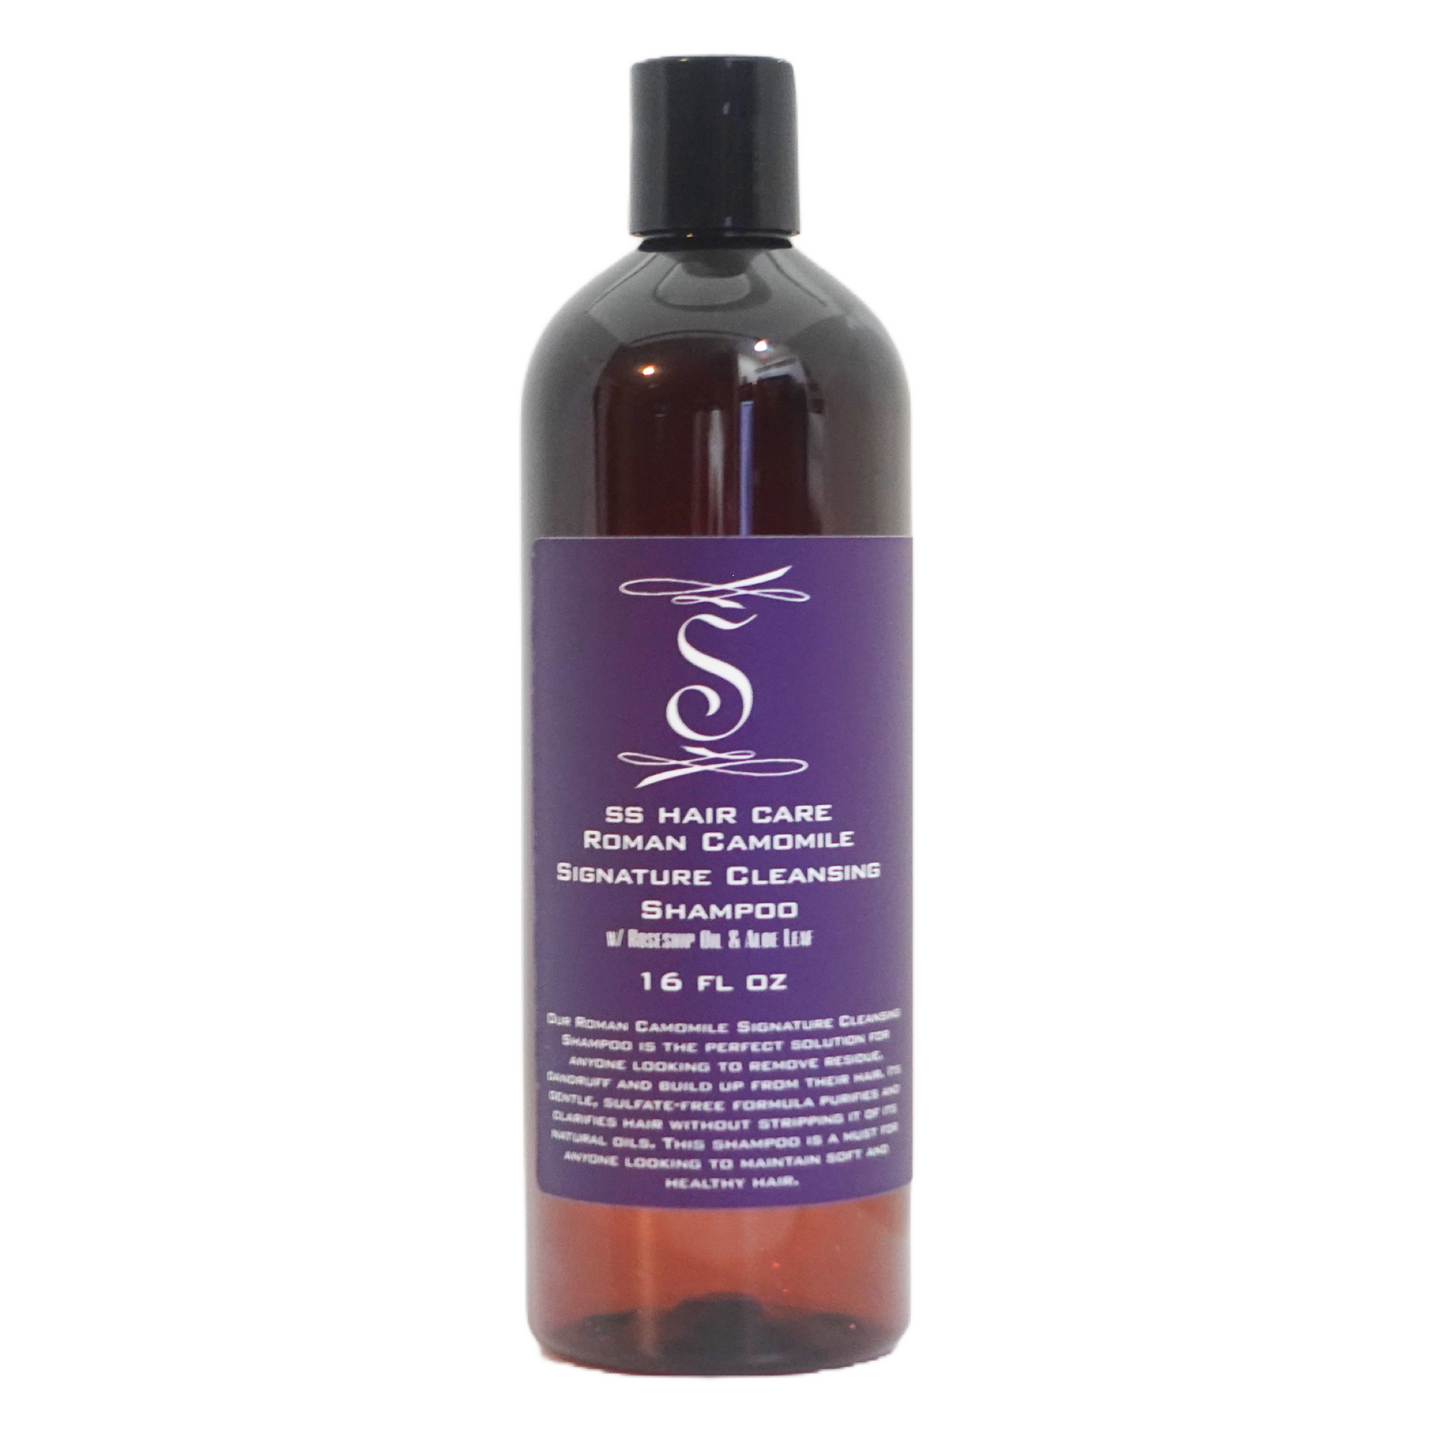 SS Hair Care Roman Camomile Signature Cleansing Shampoo